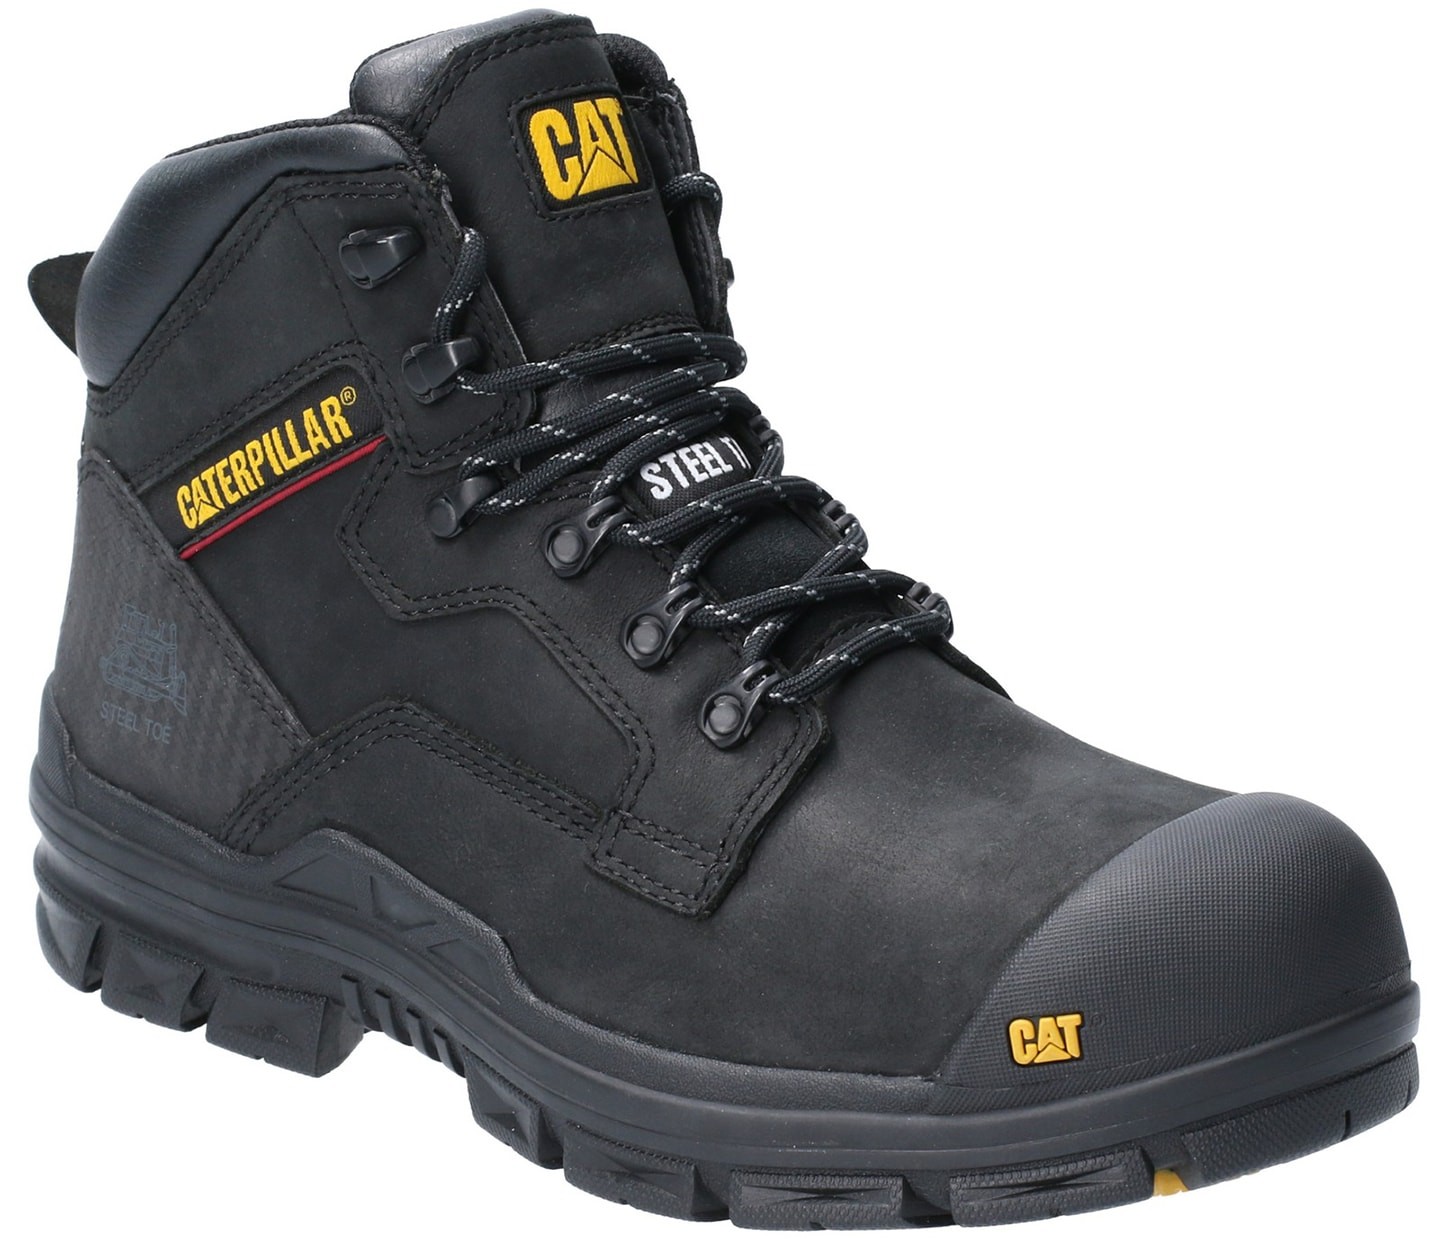 Bearing Lace Up Safety Boot